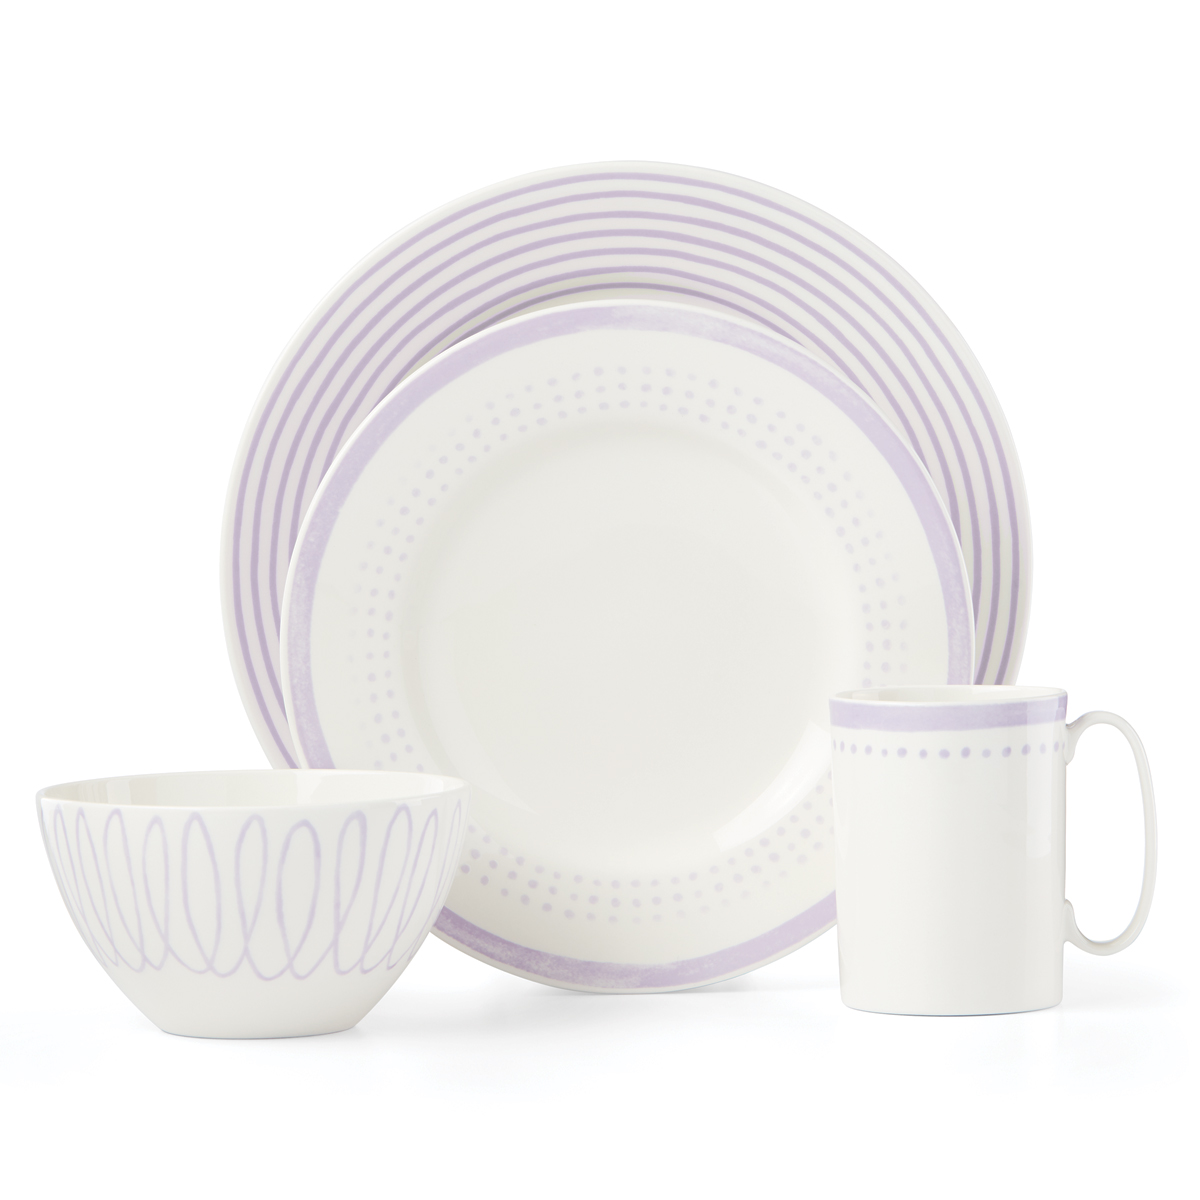 Kate Spade China by Lenox, Charlotte Street East Lilac 4 Piece Place Setting